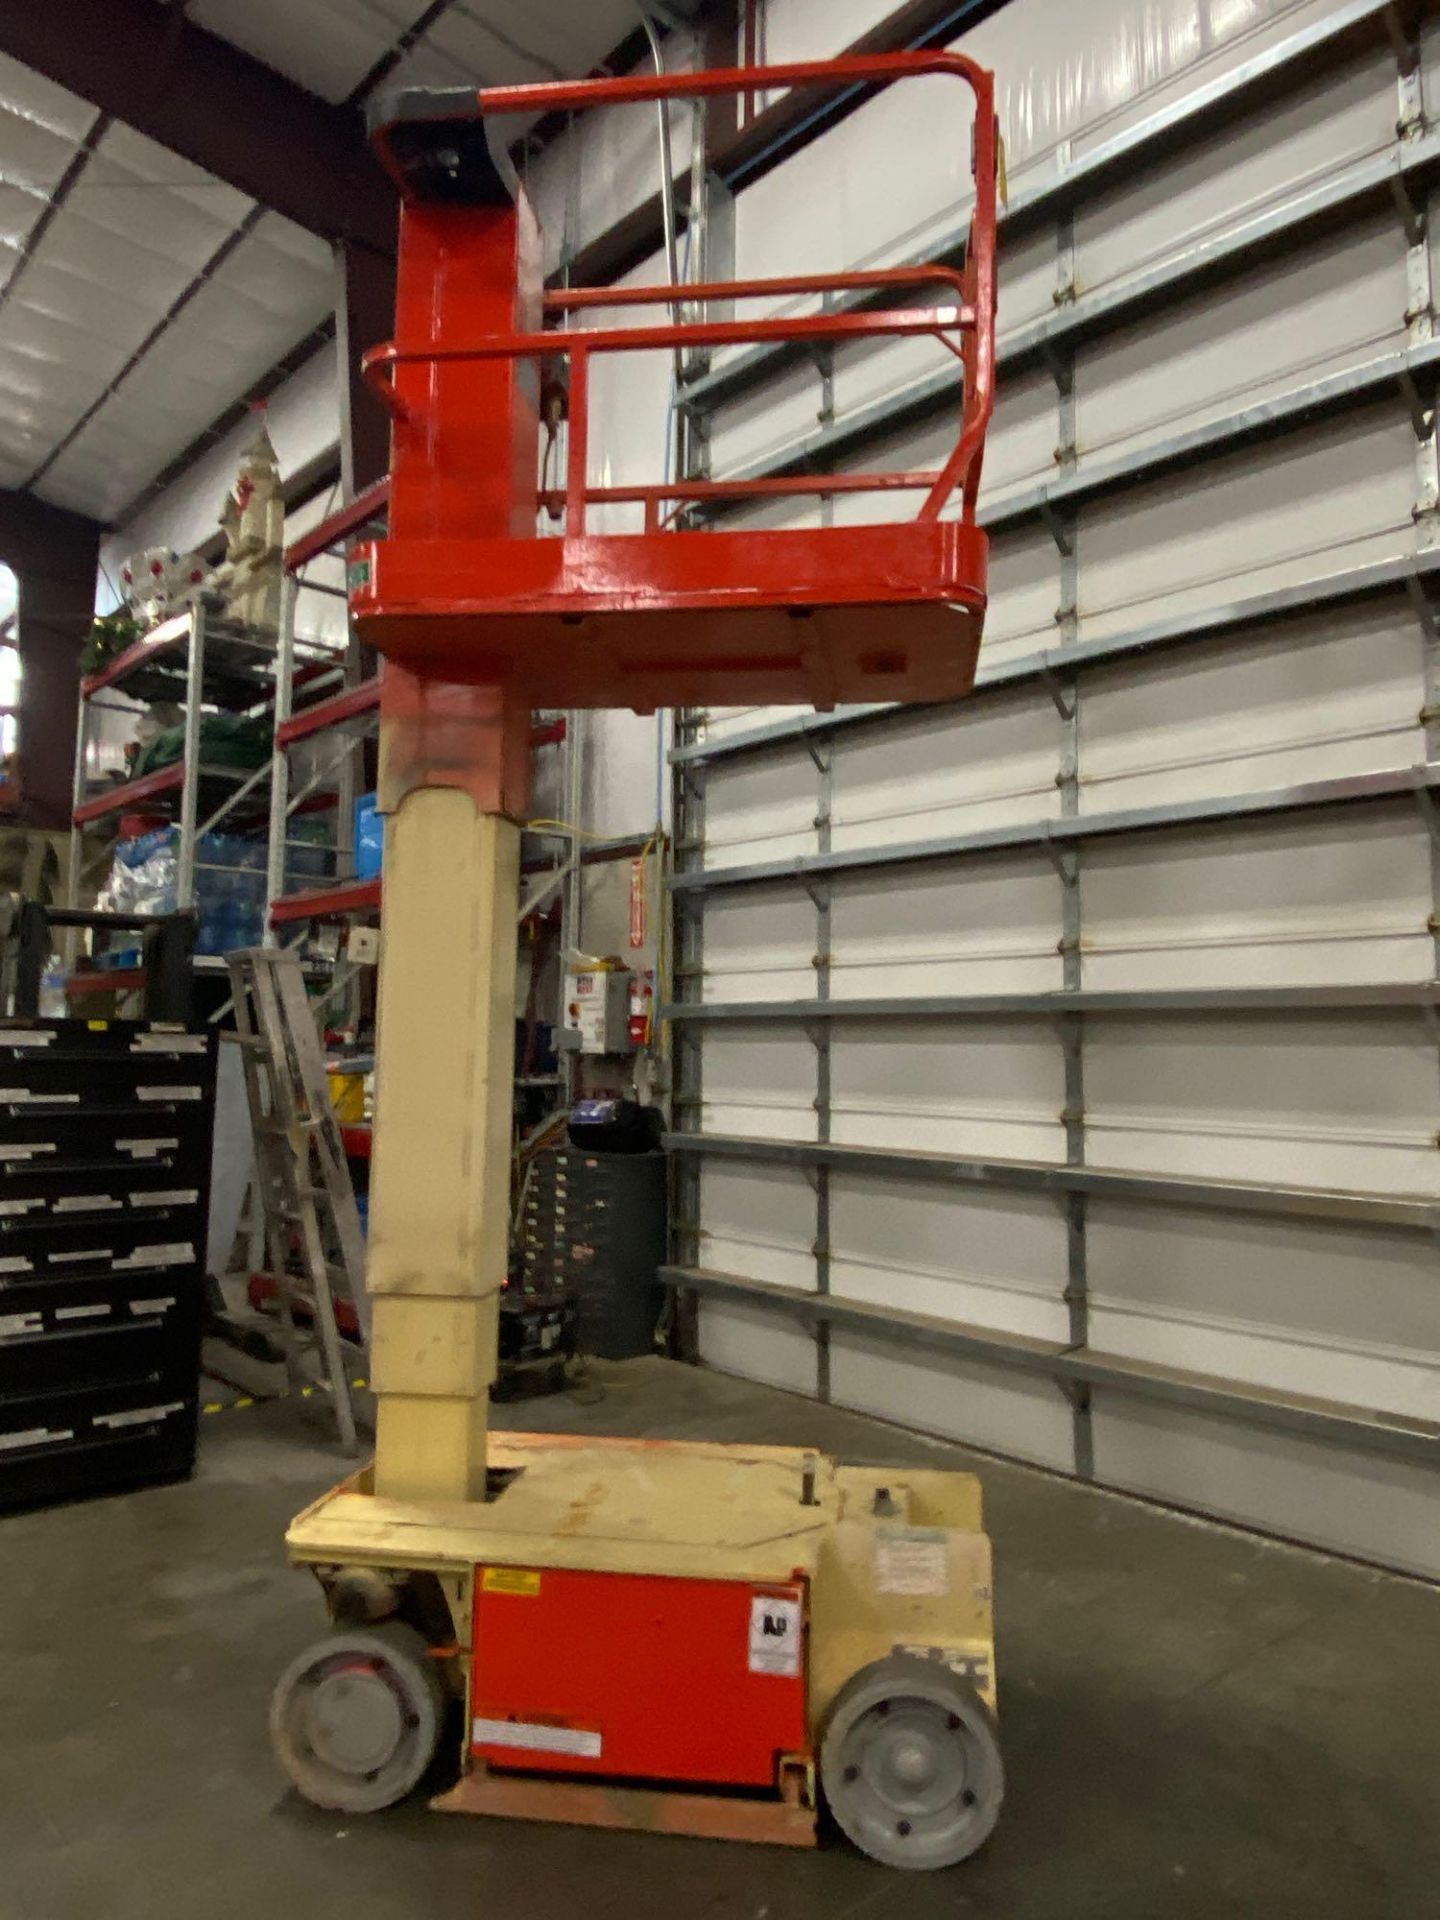 JLG 1230 ES ELECTRIC MAN LIFT, SELF PROPELLED, BUILT IN BATTERY CHARGER, 12' PLATFORM HEIGHT, APPROX - Image 6 of 6